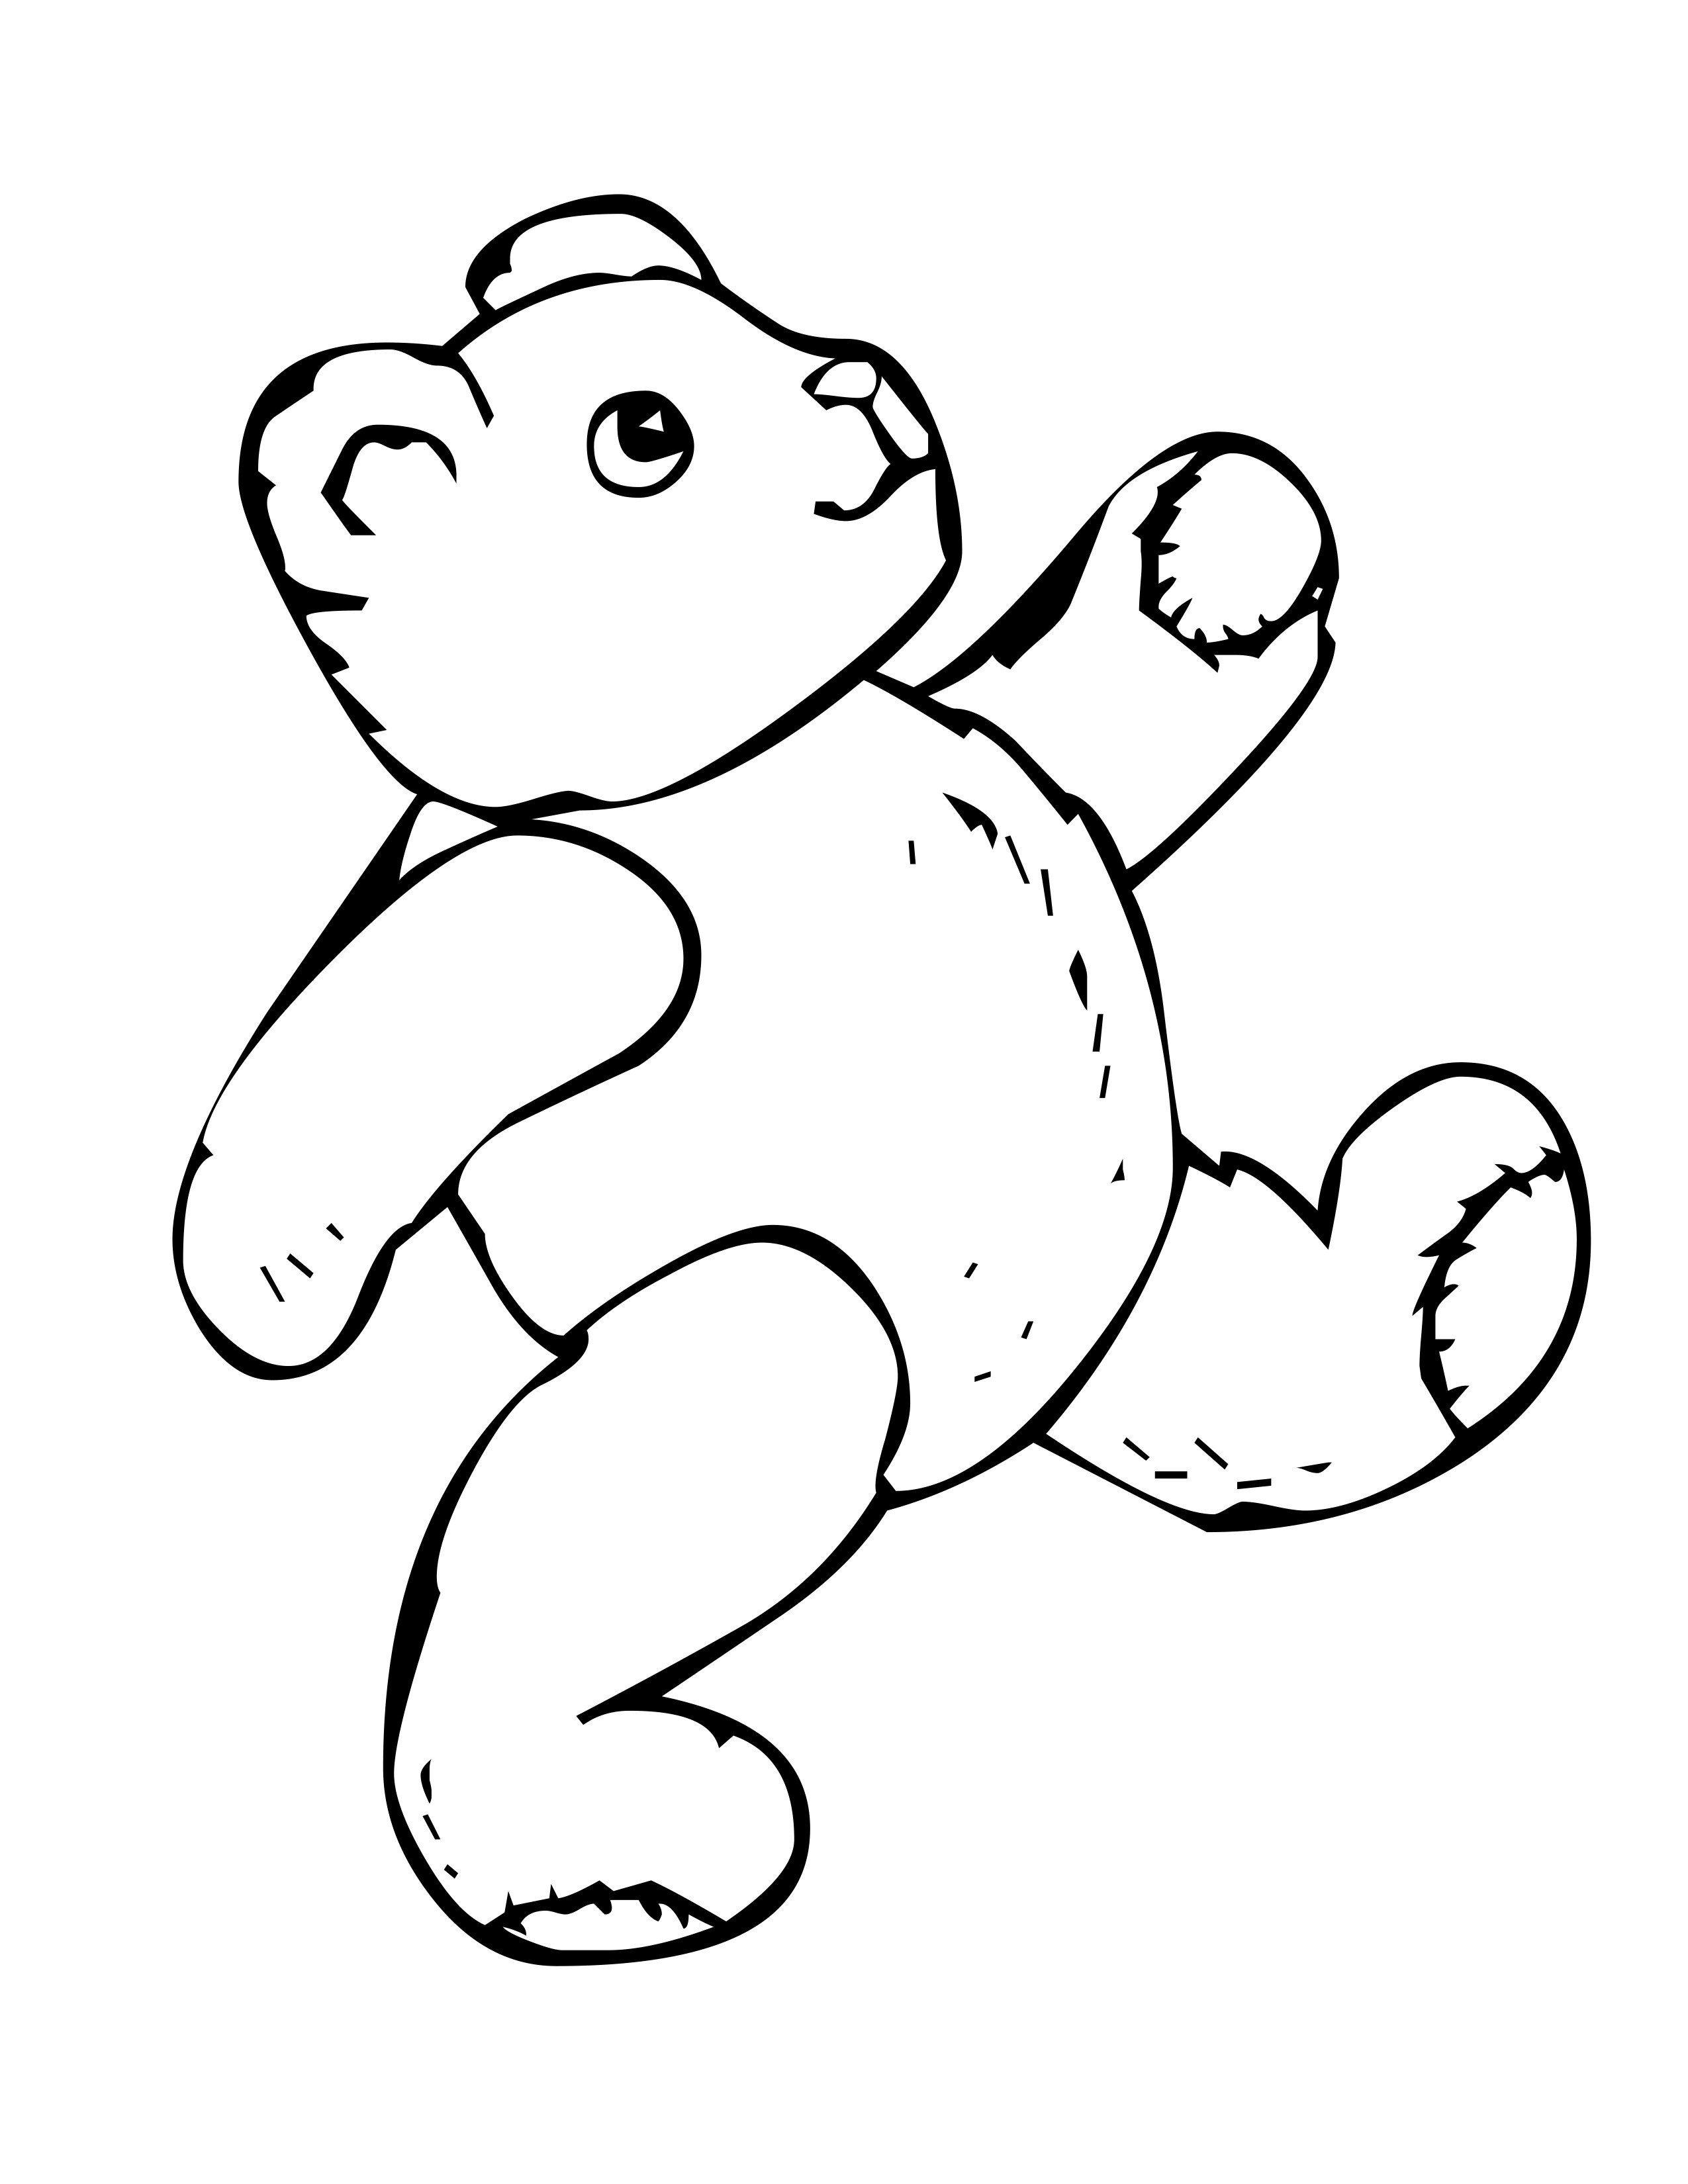 Printable Bear Coloring Pages For Kids Coloring Pages